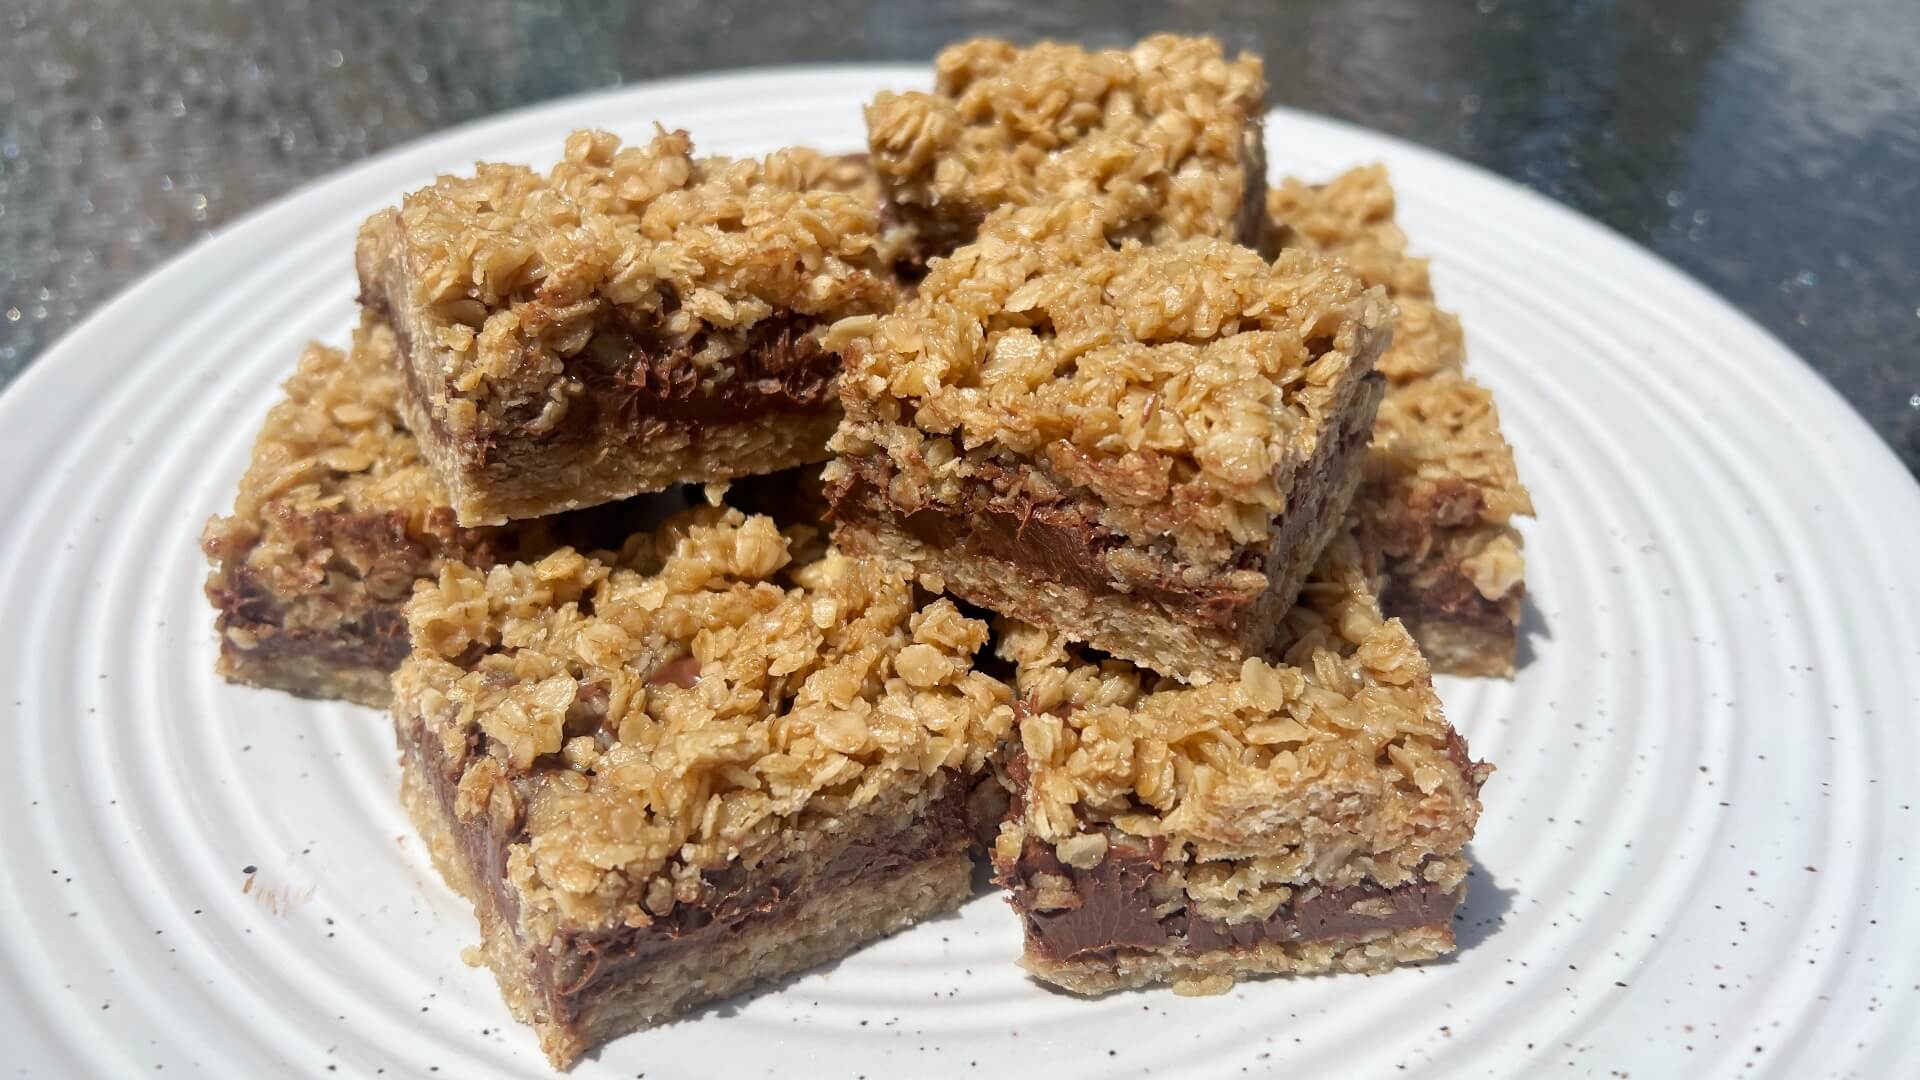 A white speckled plate with square oat cookie bars filled with a chocolate fudgy filling.